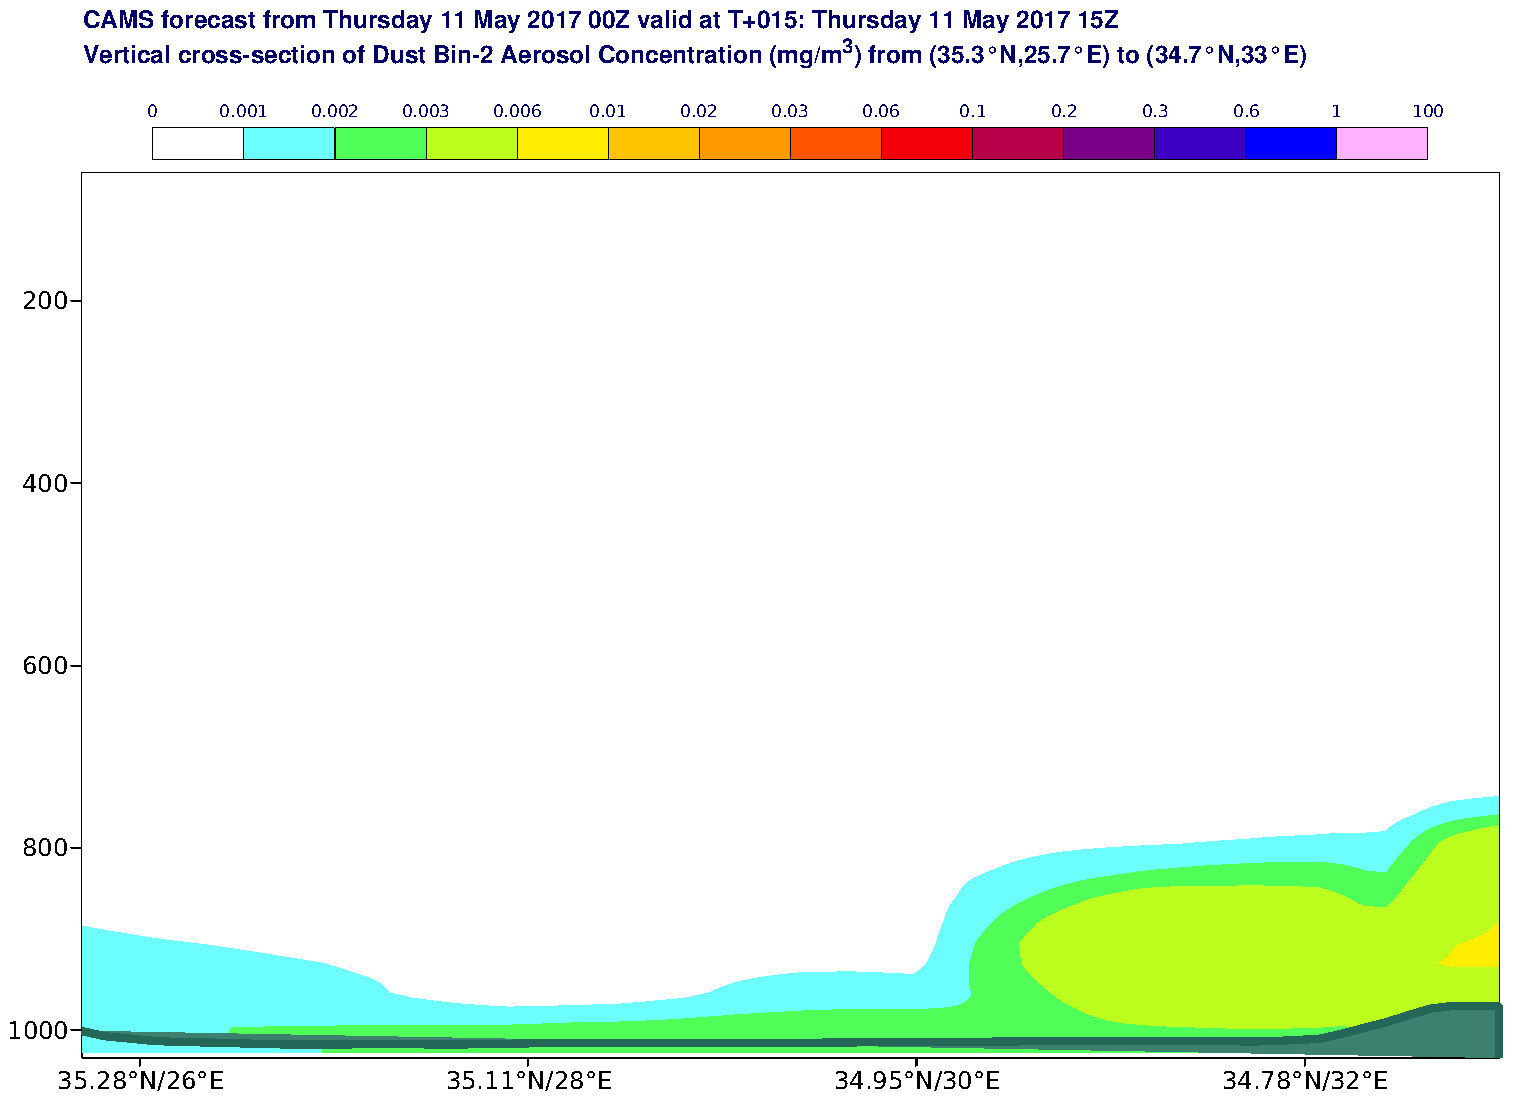 Vertical cross-section of Dust Bin-2 Aerosol Concentration (mg/m3) valid at T15 - 2017-05-11 15:00